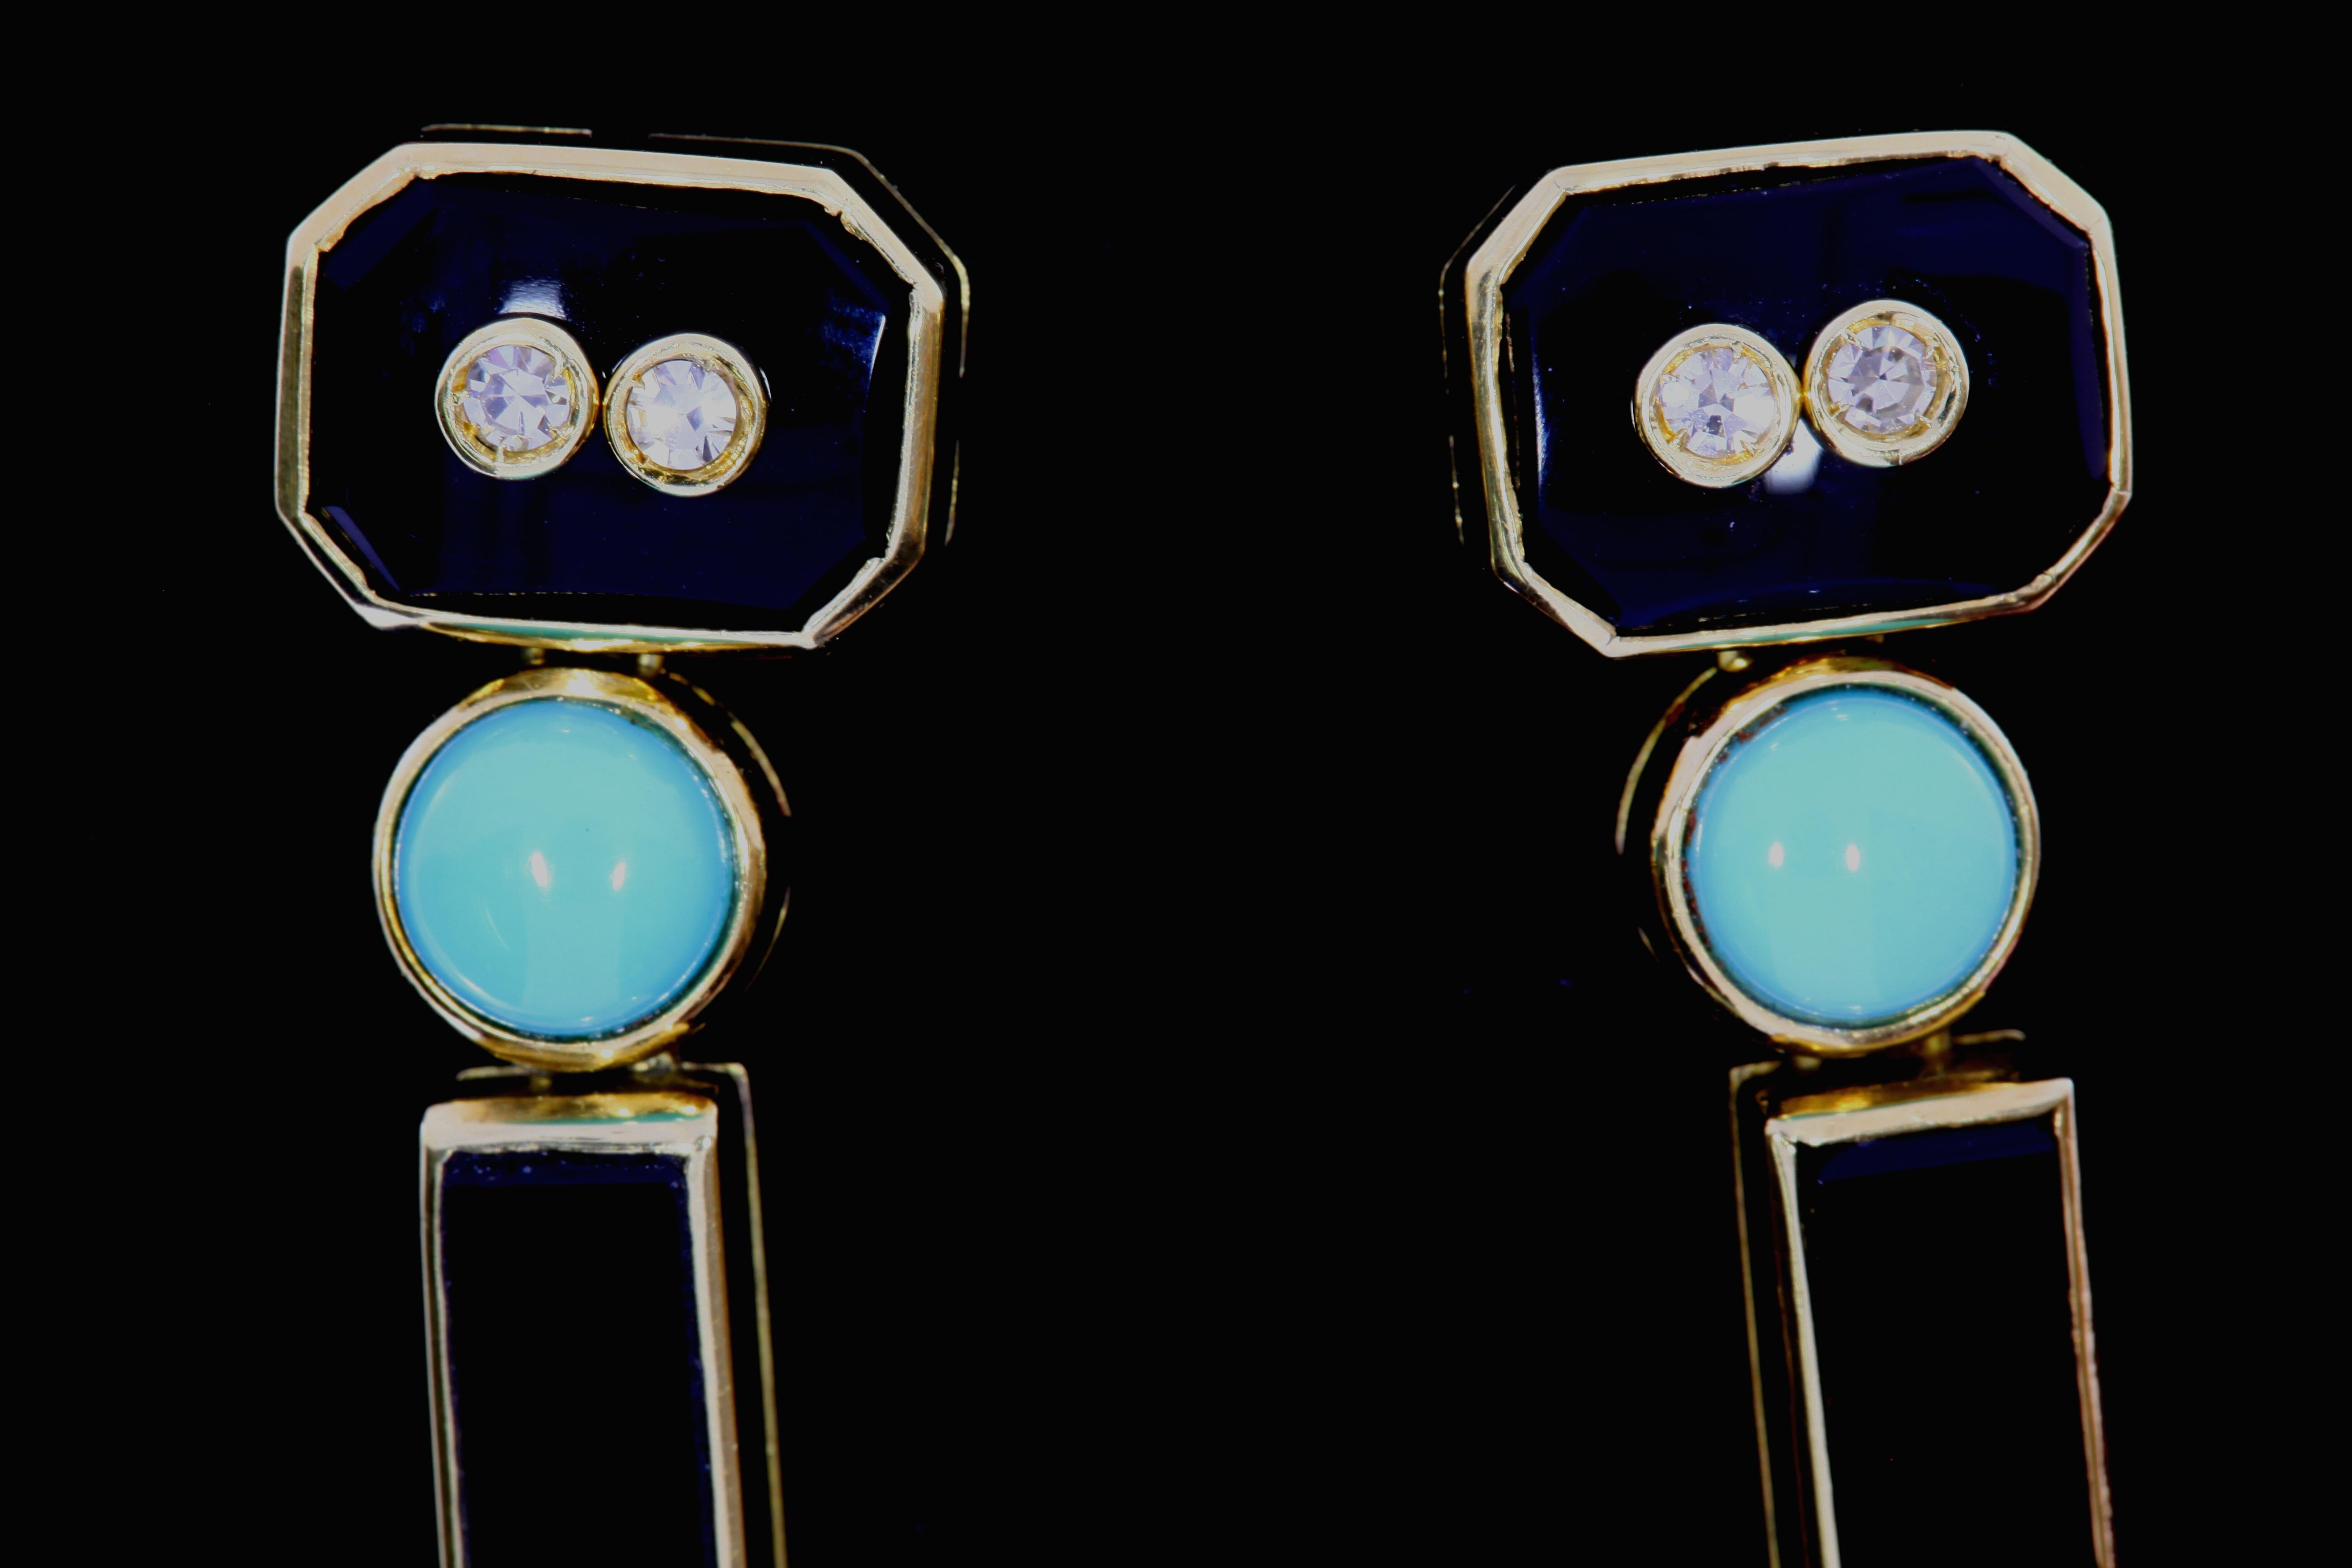 These earrings from the 1930's in the Art Deco style have turqoise, onyx, diamonds, set in 18 karat yellow gold. The earrings dangle from side to side and are secured with a pushpin. 